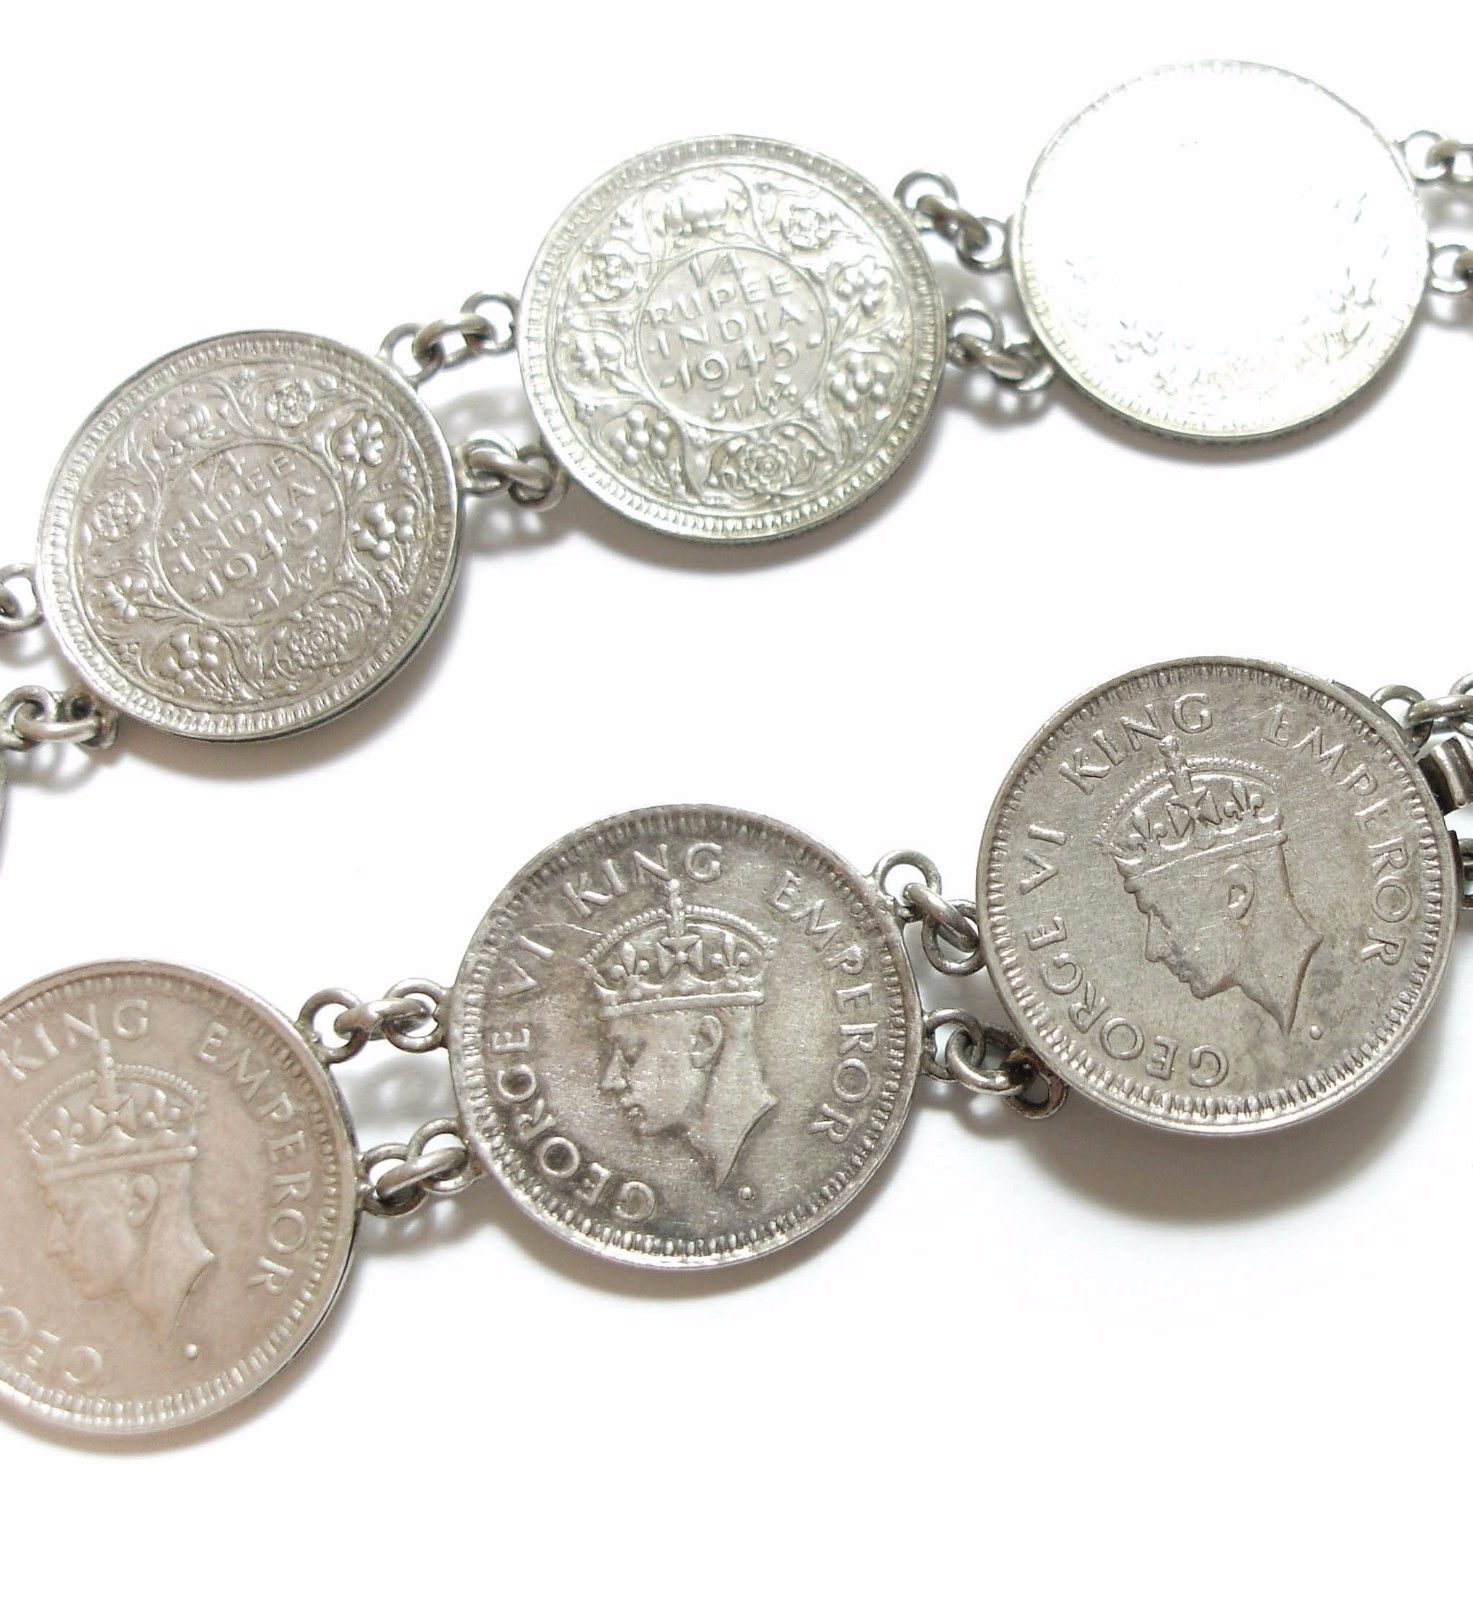 STUNNING OLD ANTIQUE EDWARDIAN SILVER COIN GEORGE VI RUPEE NECKLACE ...